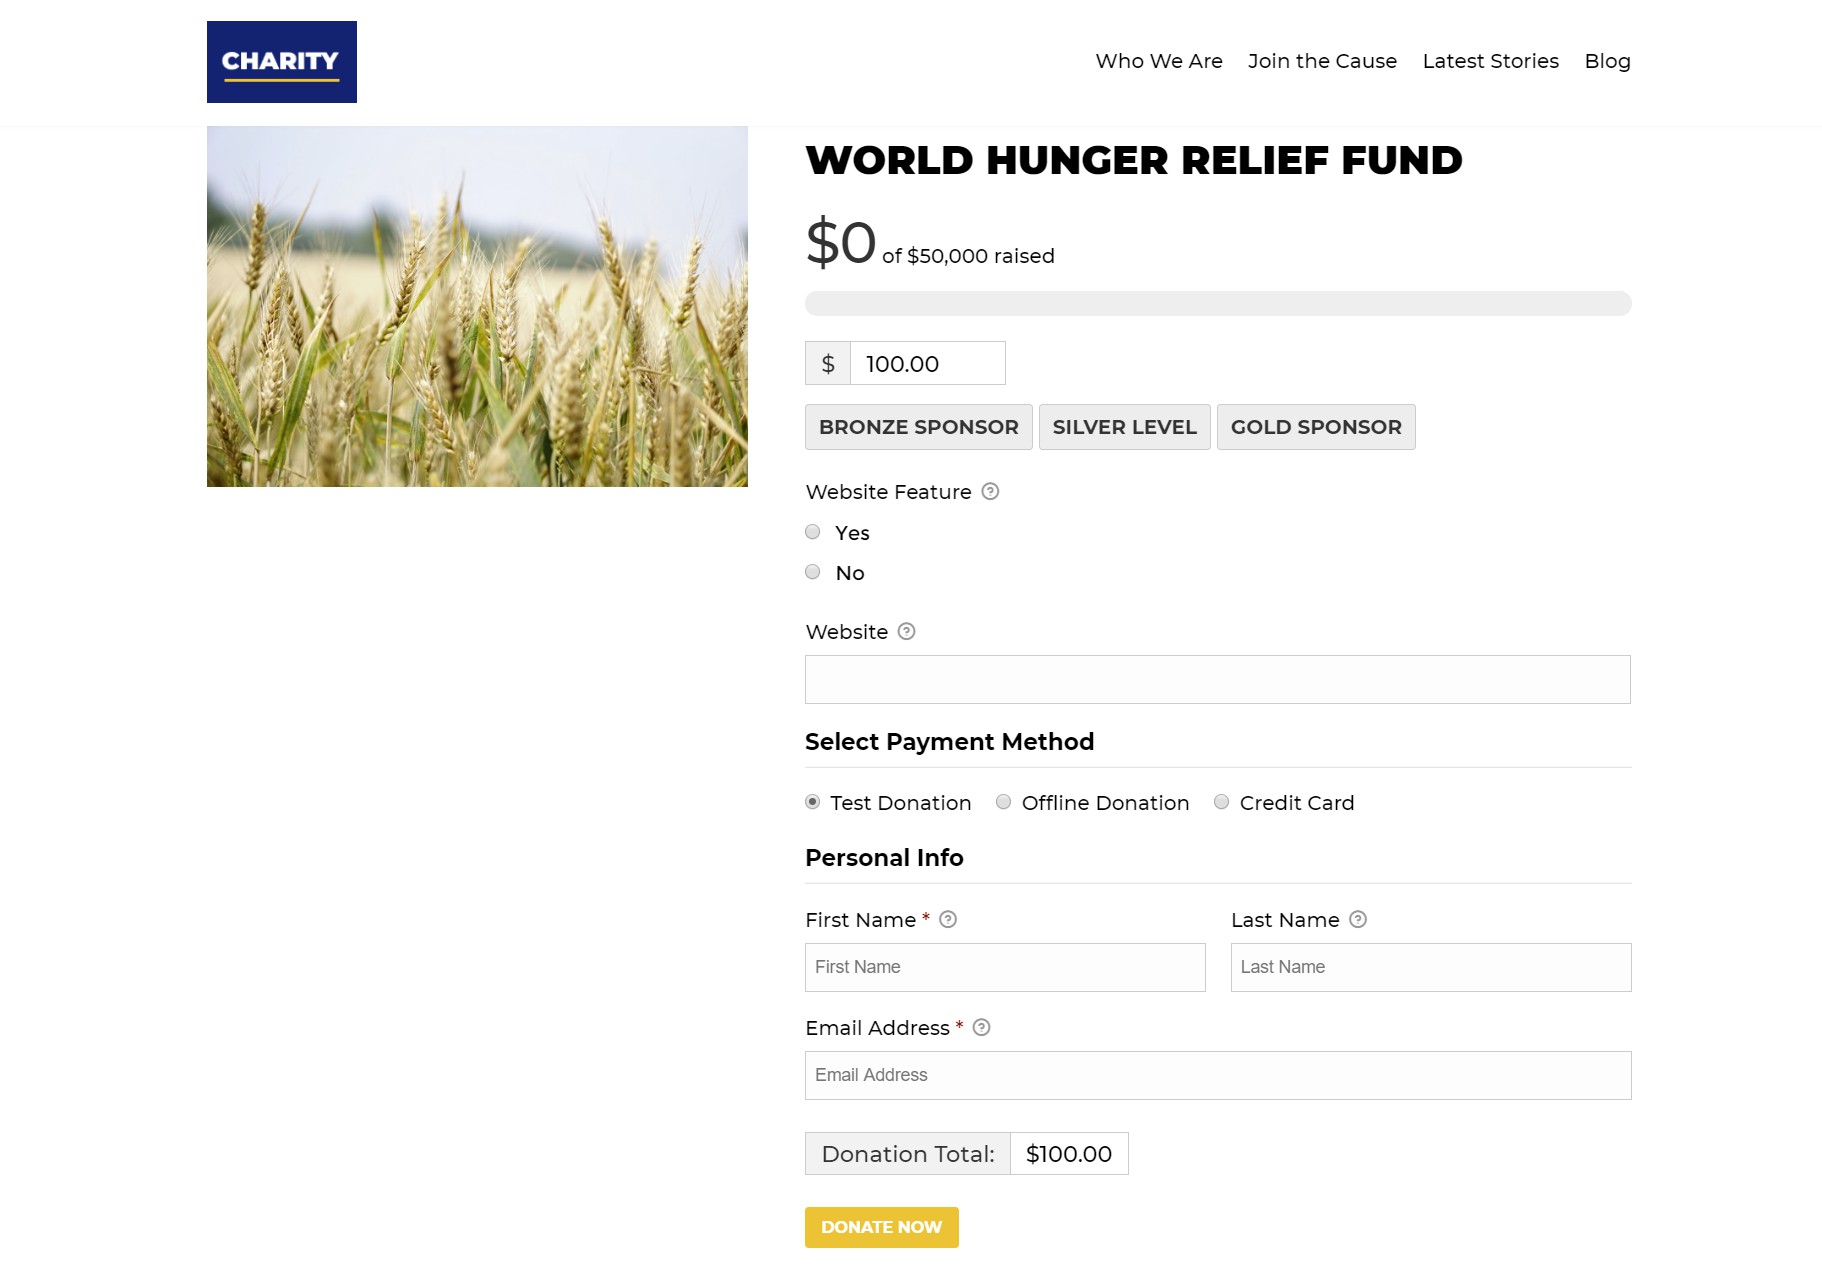 The World Hunger Relief donation form has $0 out of $150 raised and is displayed in English. 